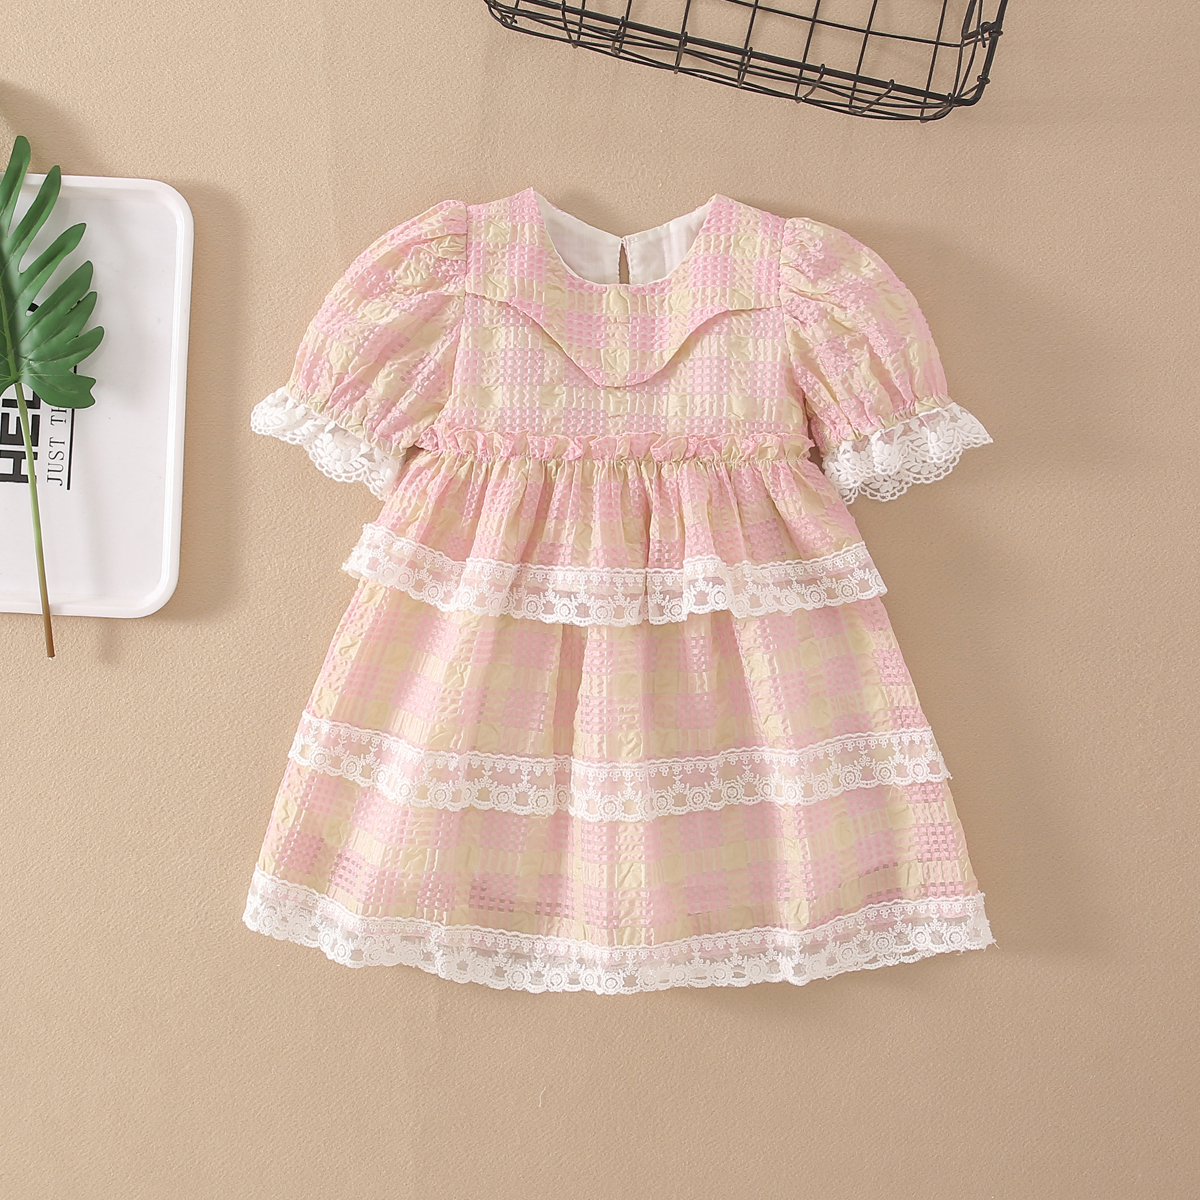 princess little girls dresses lace decorative kids cloths stores online brand China factory price